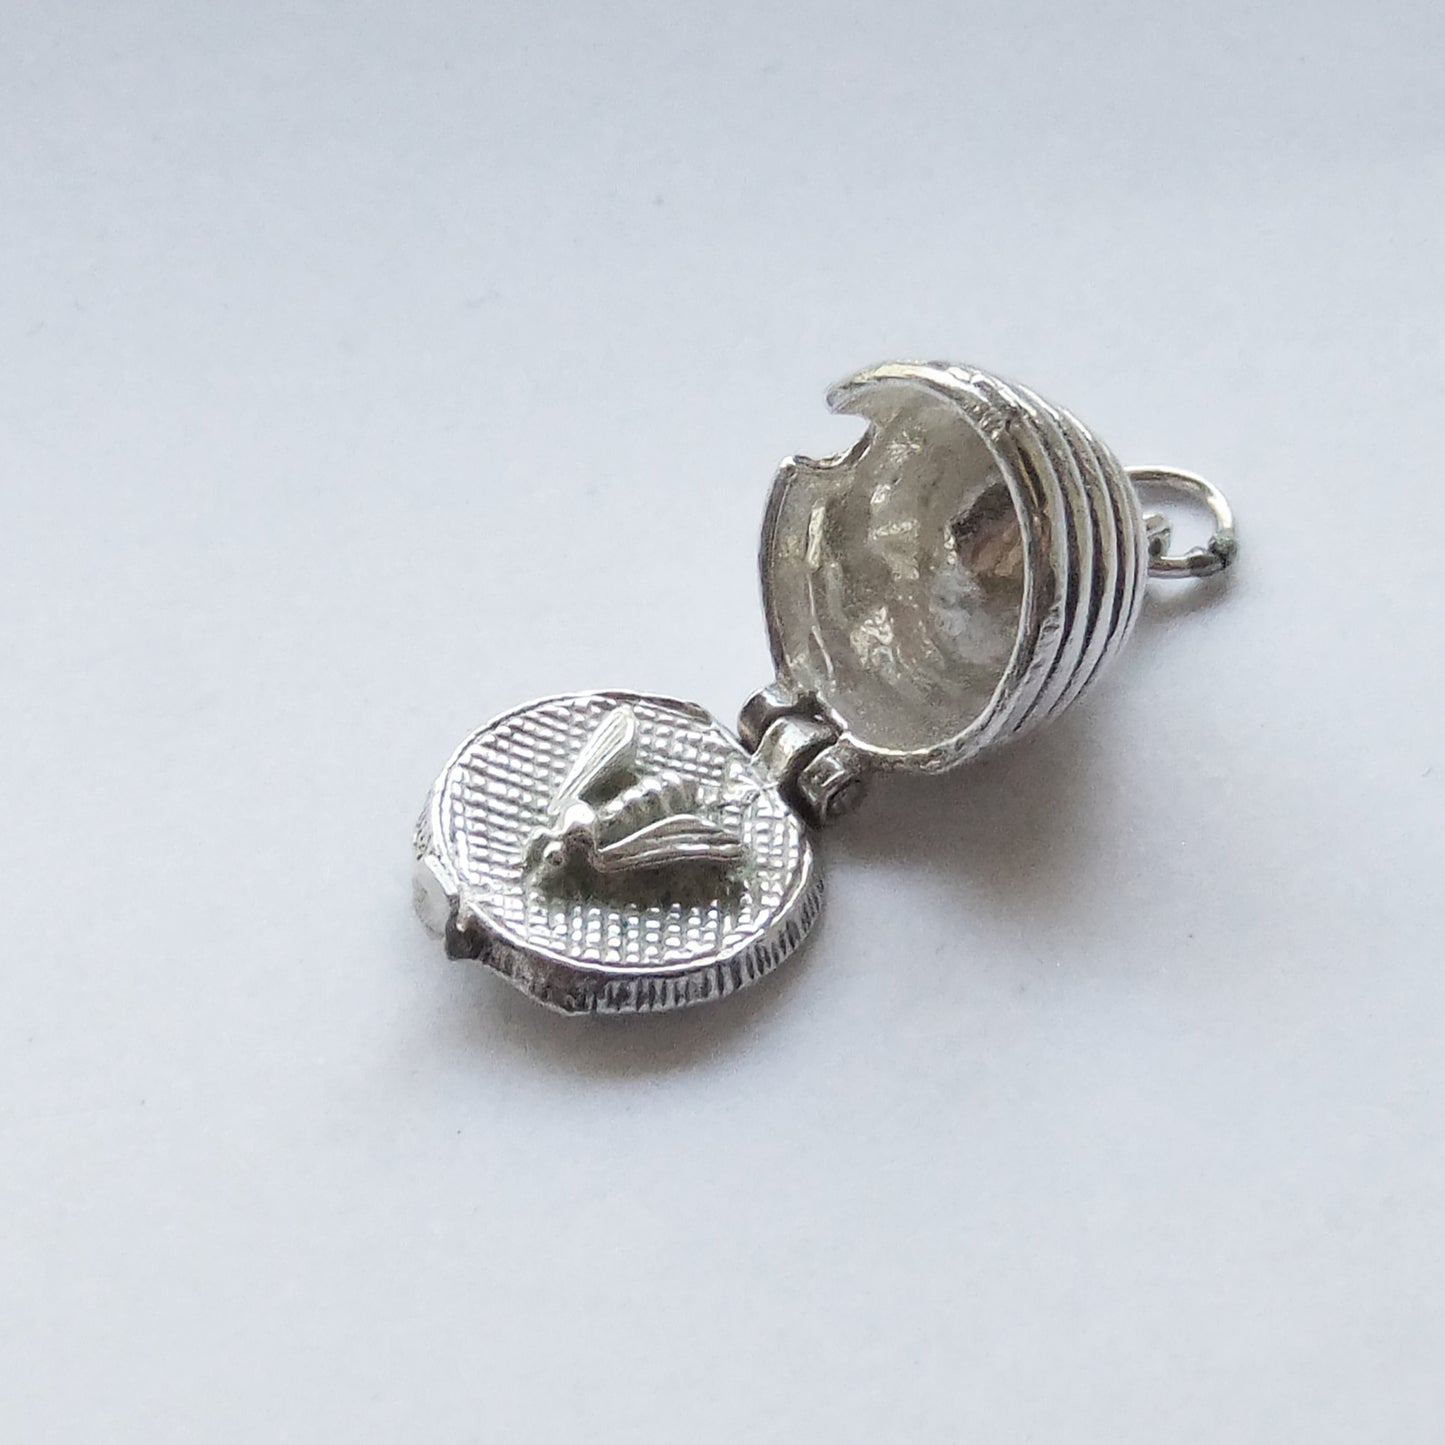 Vintage silver bee in beehive charm opens